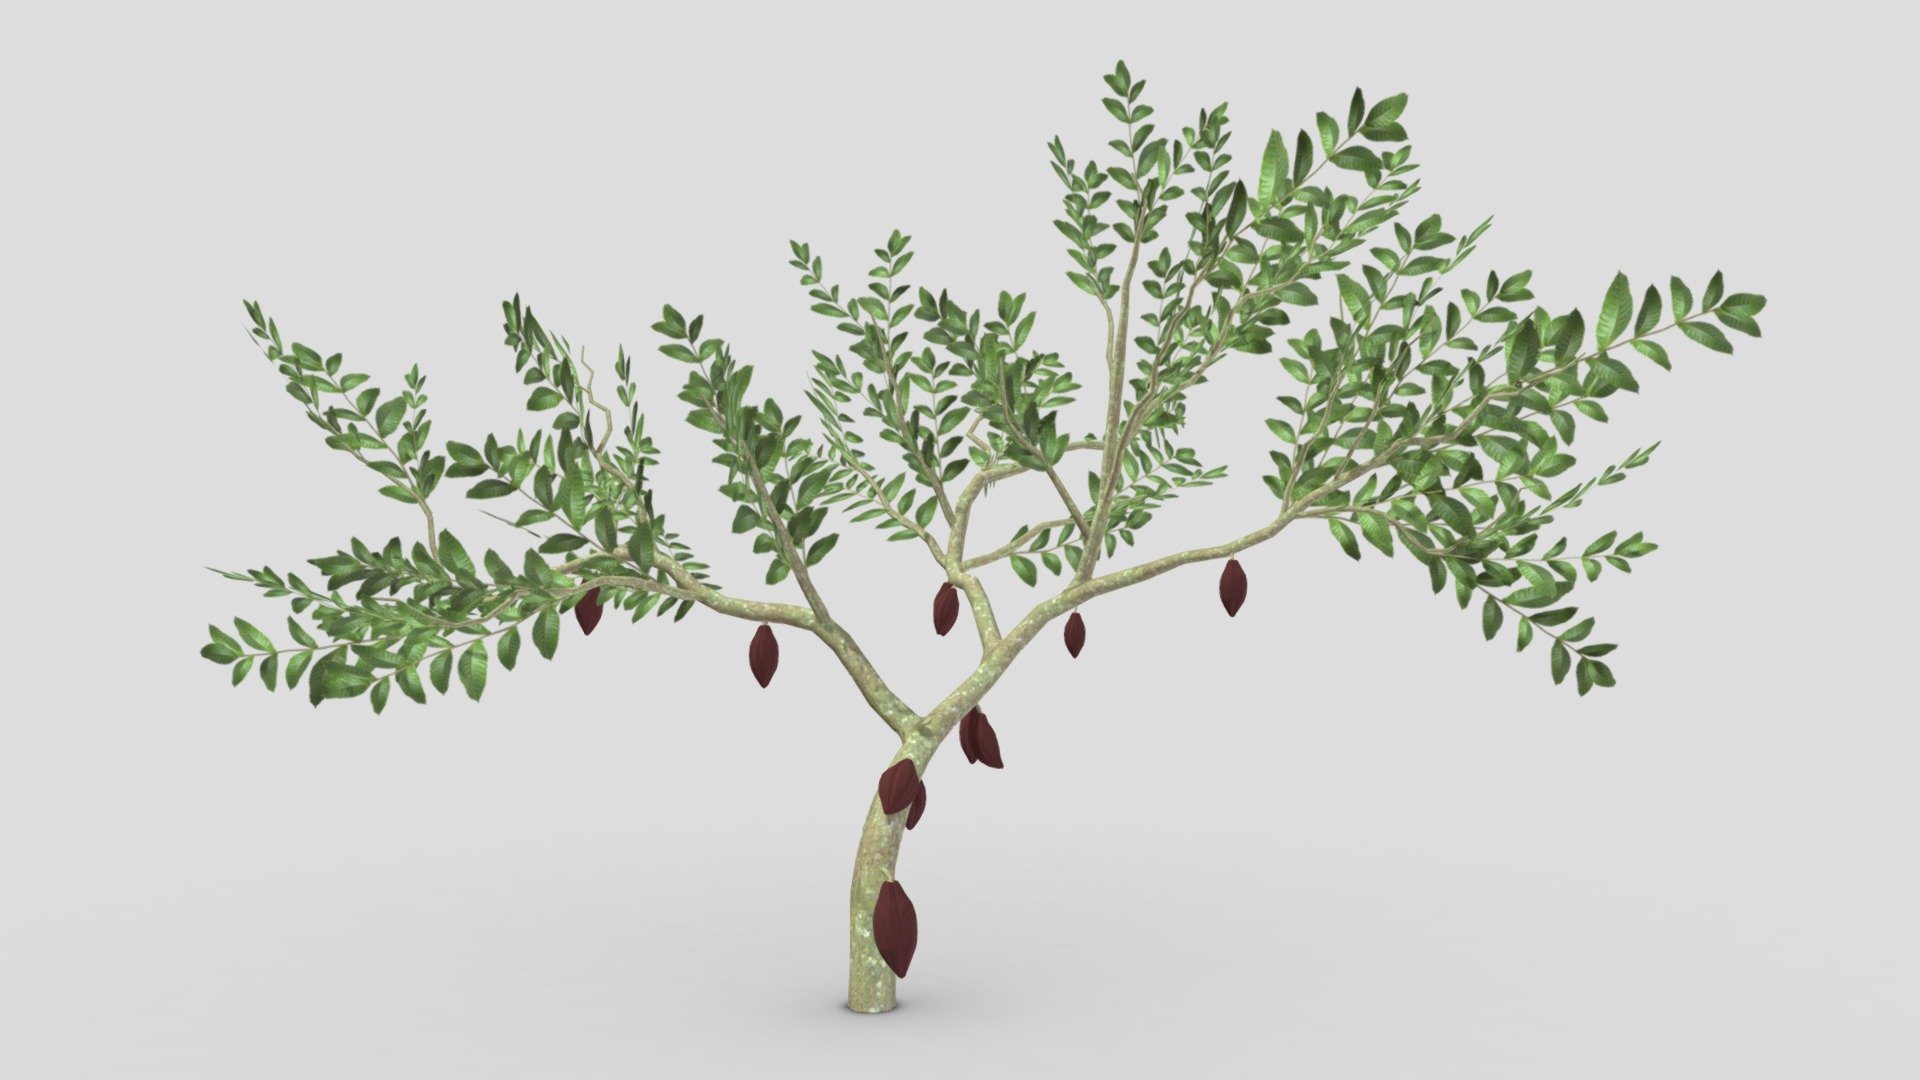 This is a 3D low poly model of a Cacao tree that you can use in your projects.

Info:

Theobroma cacao is a small evergreen tree in the family Malvaceae. Its seeds, cocoa beans, are used to make chocolate liquor, cocoa solids, cocoa butter, and chocolate. Native to the tropics of the Americas, the largest producer of cocoa beans in 2018 was Ivory Coast, at 2.2 million tons 3d model